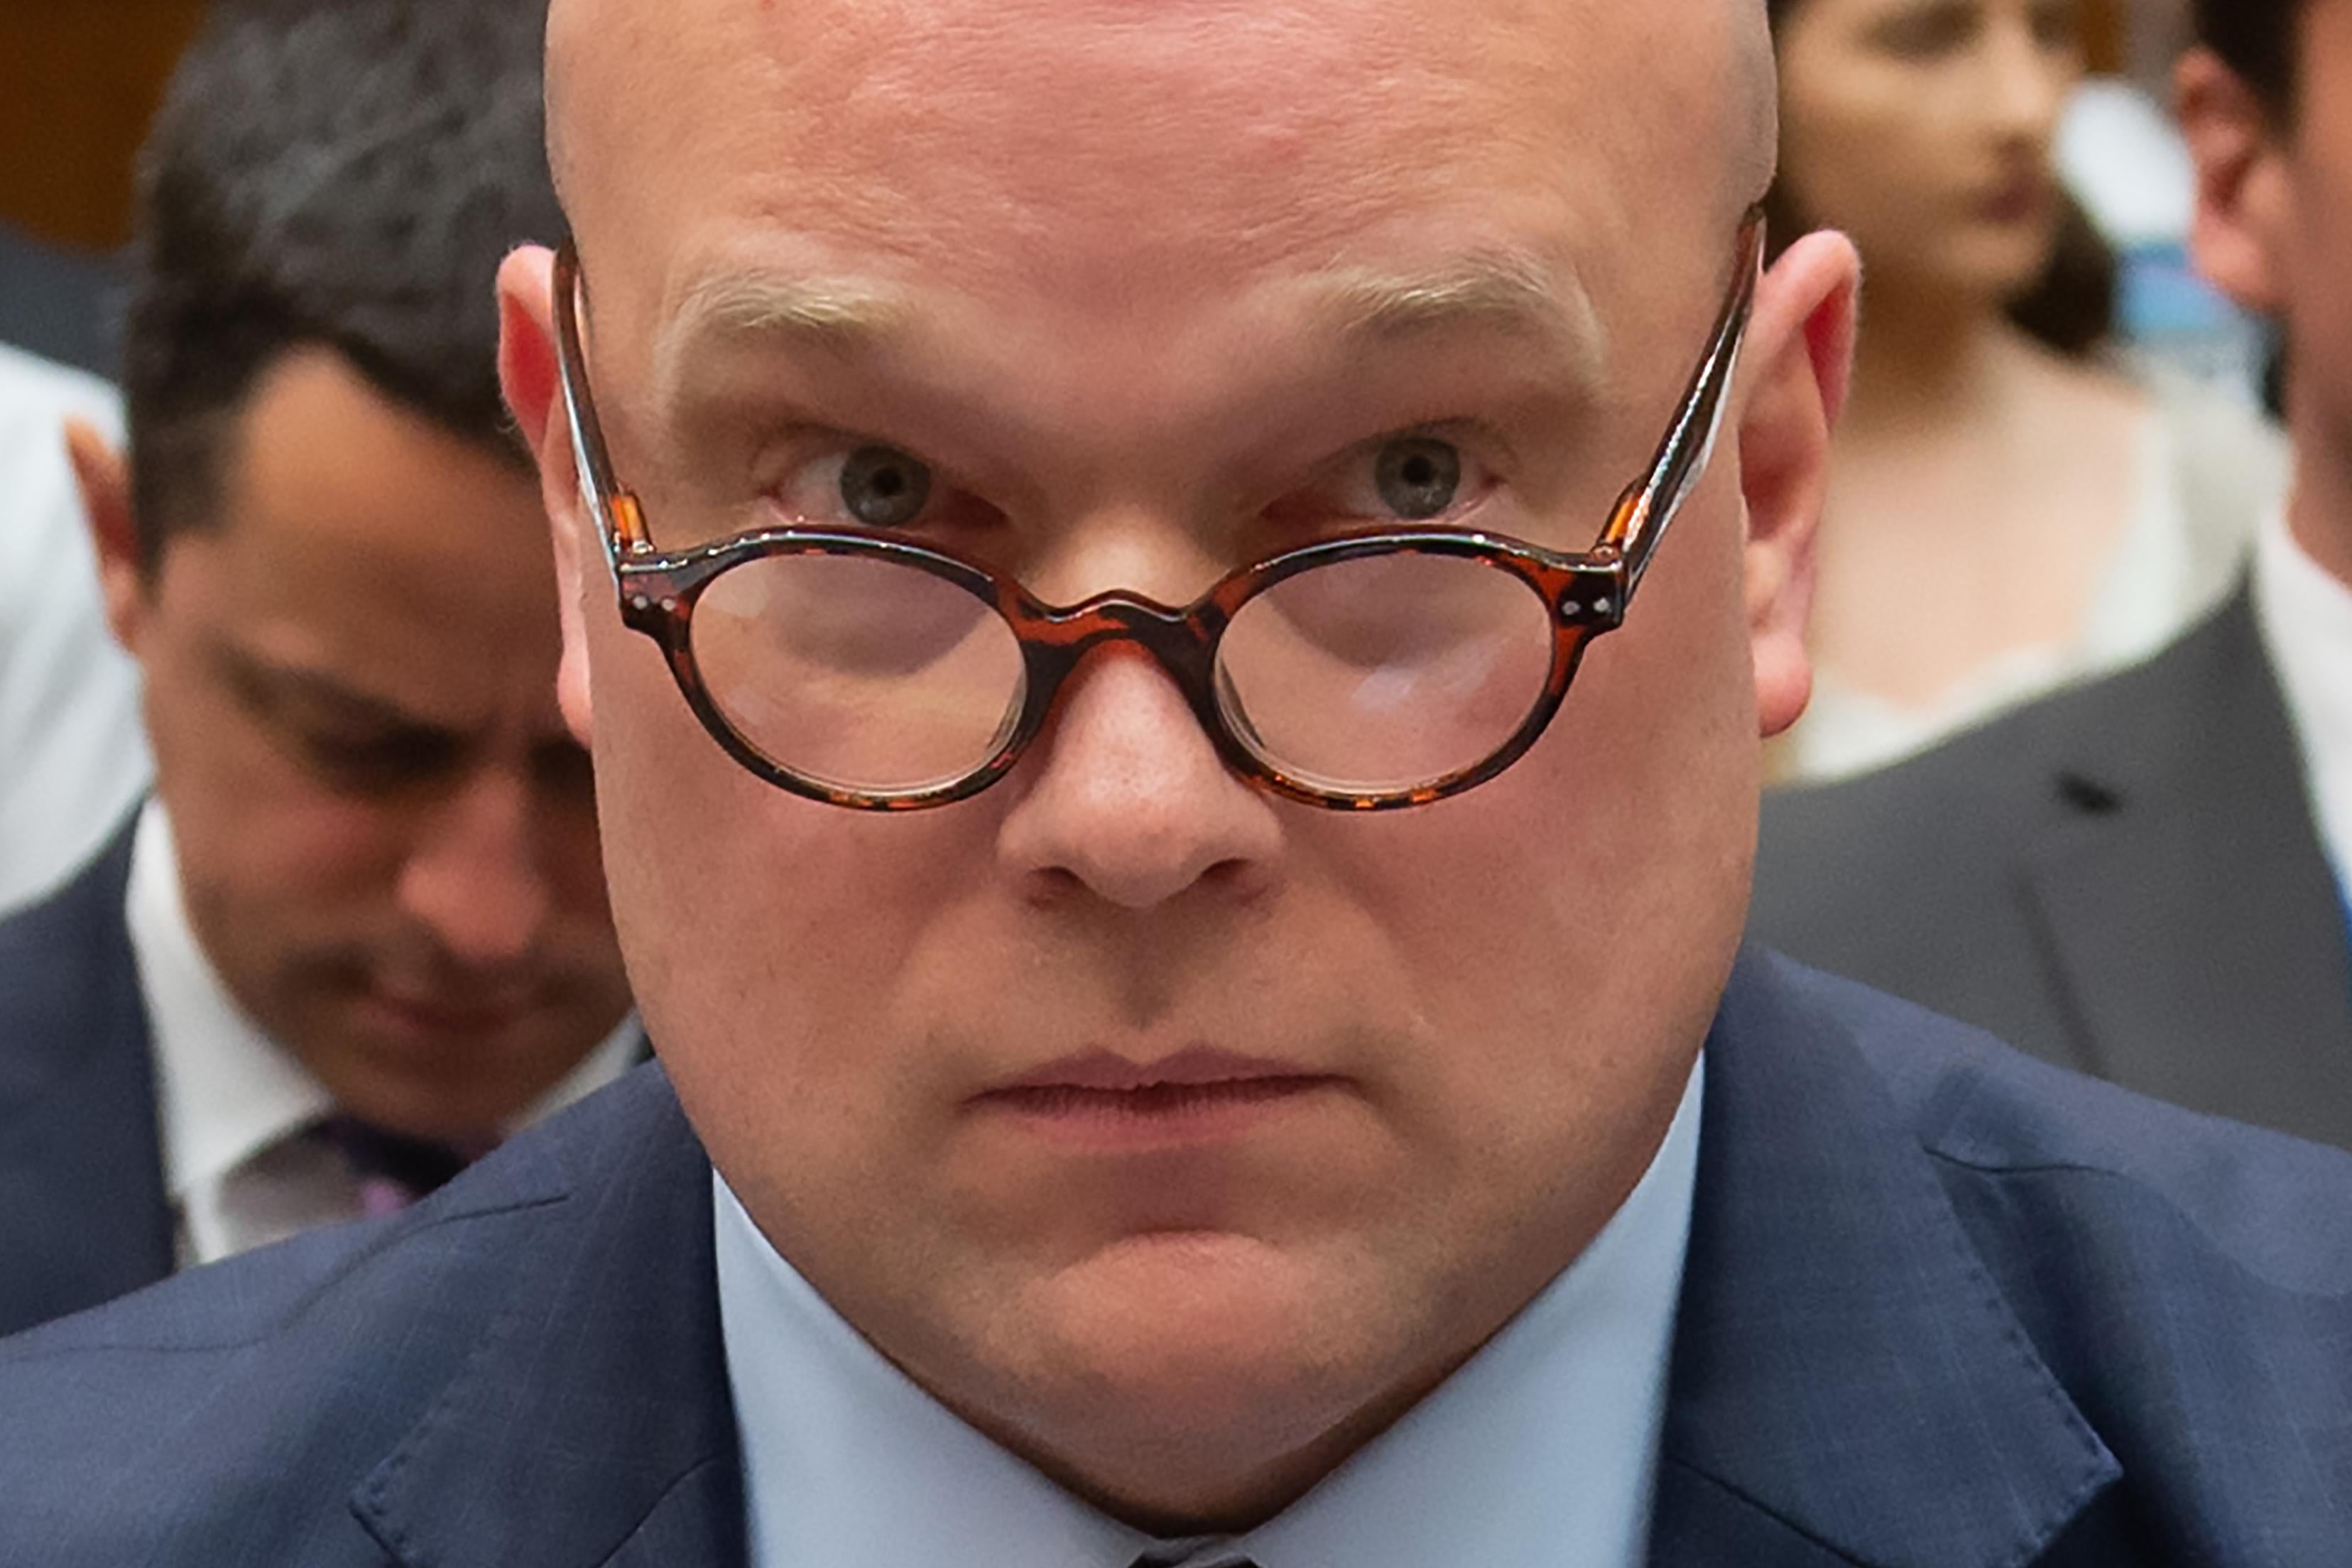 Acting Attorney General Matt Whitaker testifies before a House Judiciary Committee hearing on oversight of the Justice Department, at Capitol Hill in Washington, DC, on February 8, 2019. 